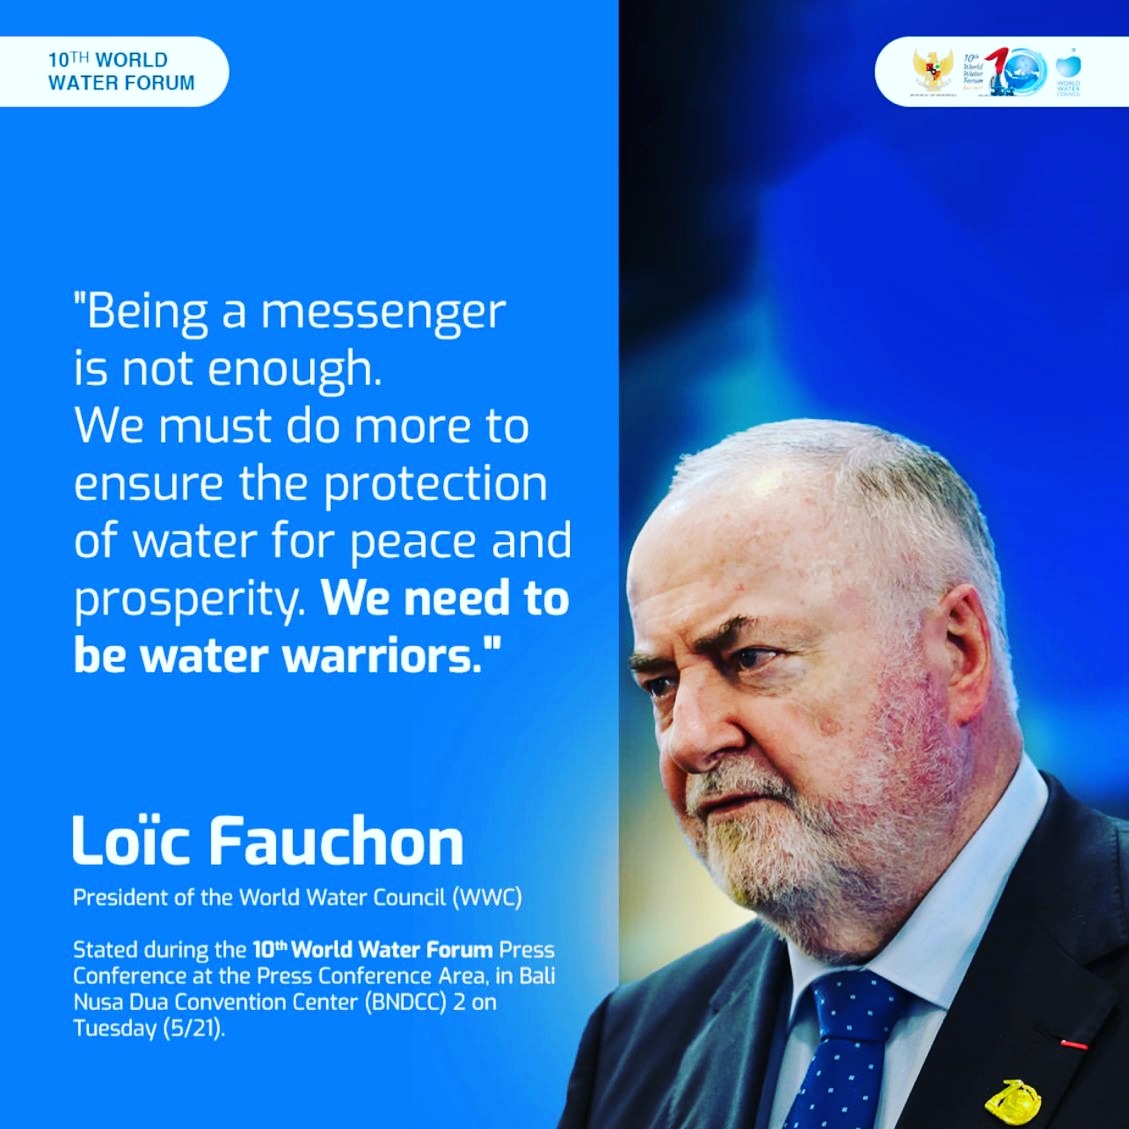 #10thworldwaterforum
'Being a messenger is not enough. We must do more to ensure the protection of water for peace and prosperity. We need to be water warriors.'
 The President of the World Water Council (WWC)

#takeaction